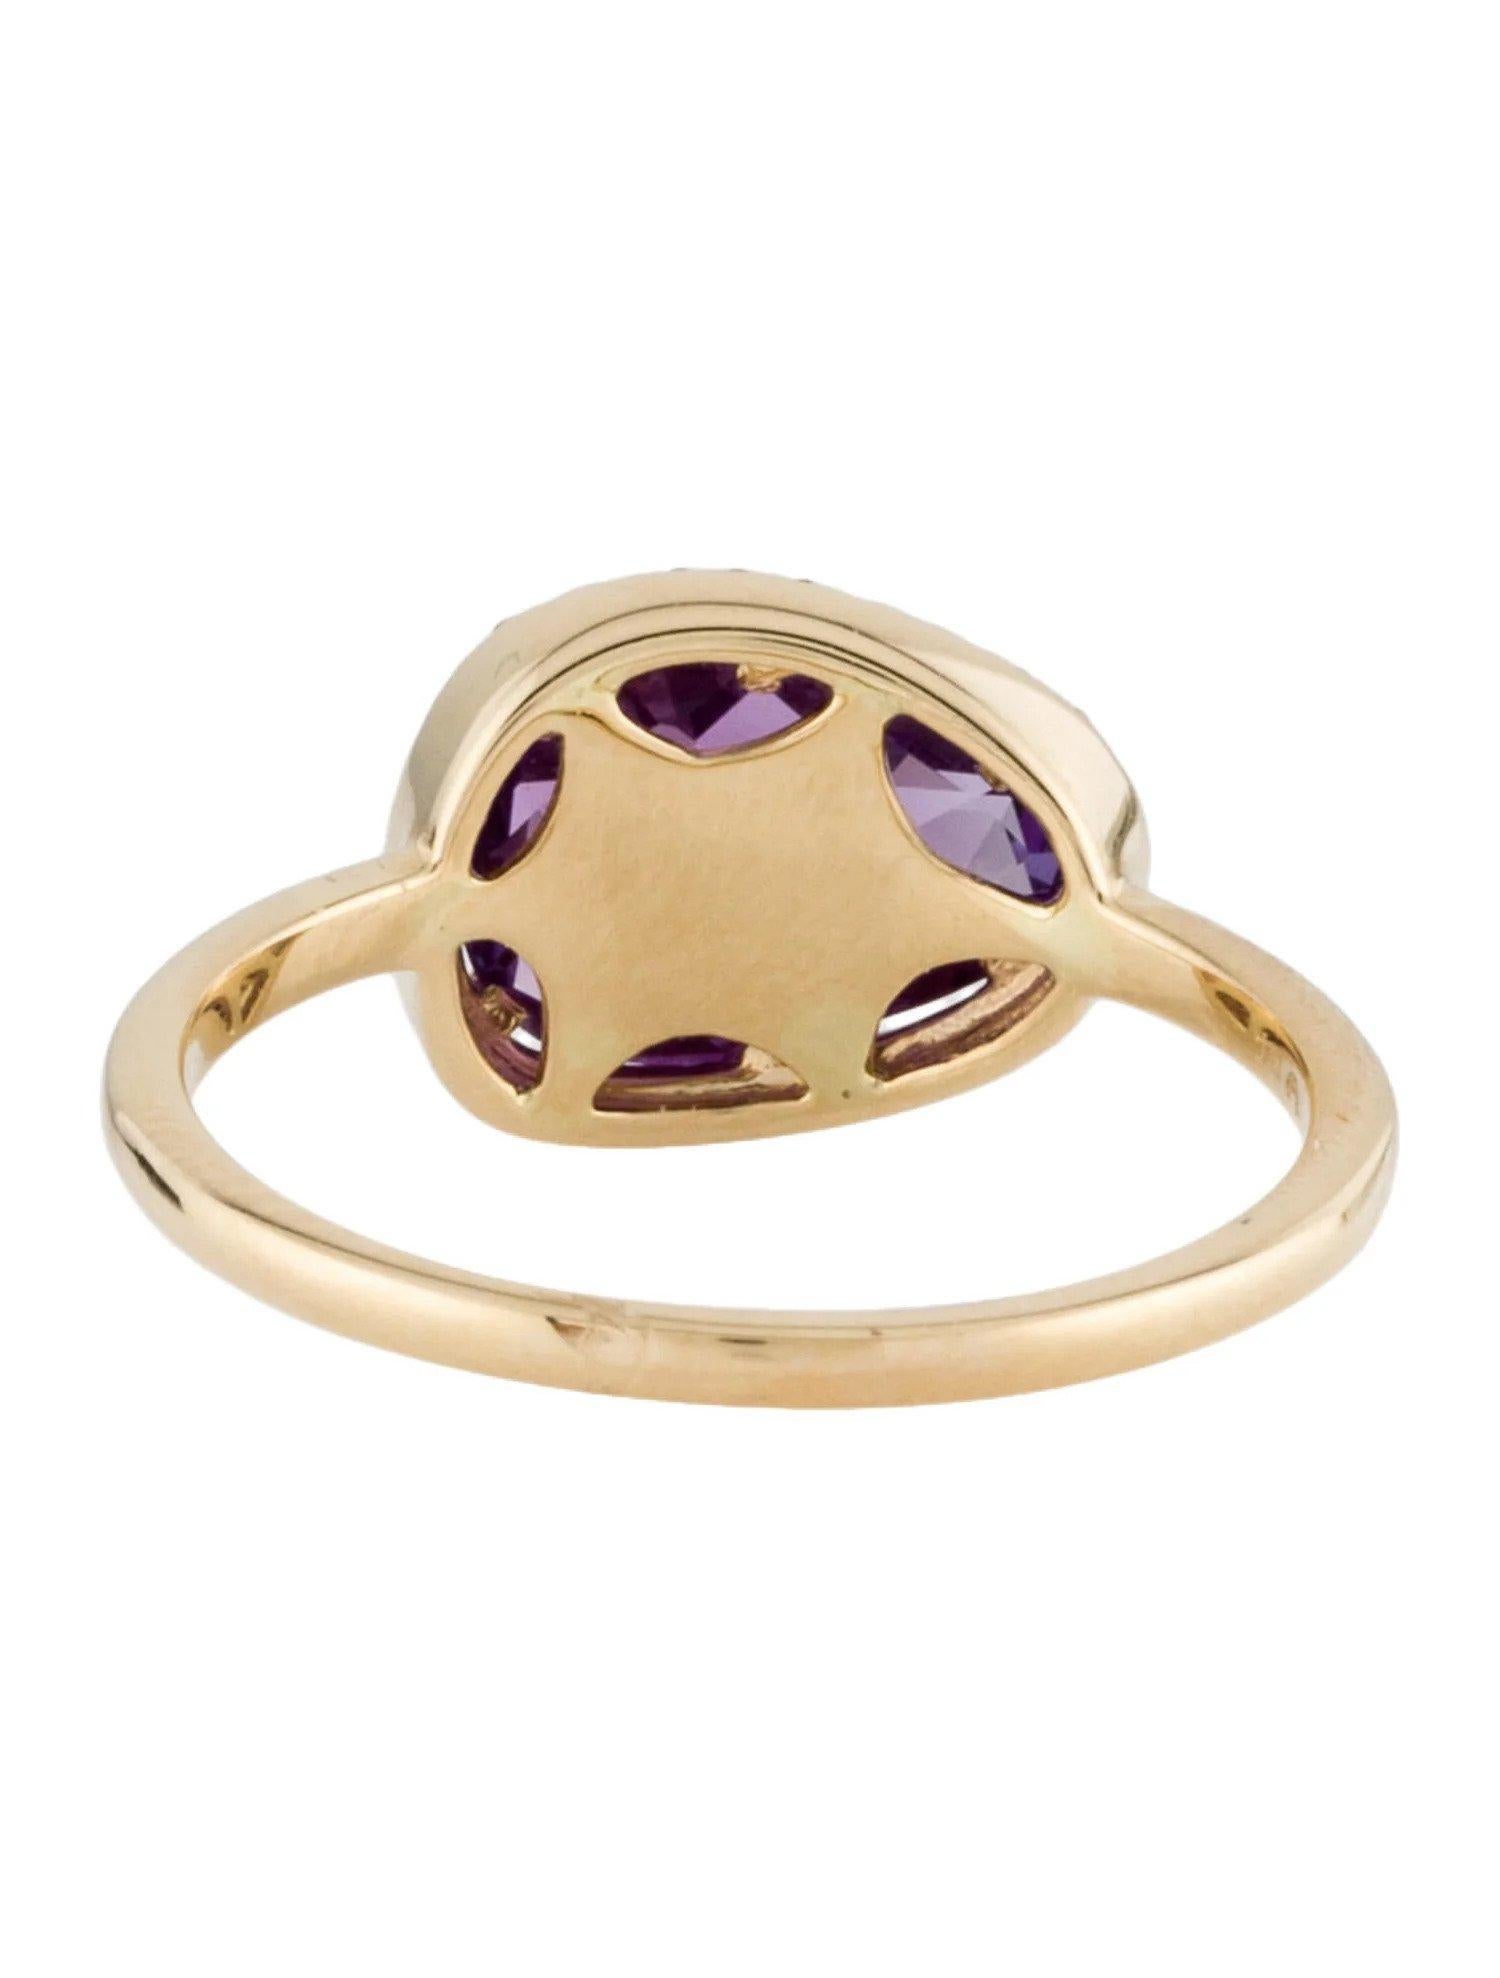 1.97 Carat Amethyst & Diamond Yellow Gold Ring In New Condition For Sale In Great Neck, NY